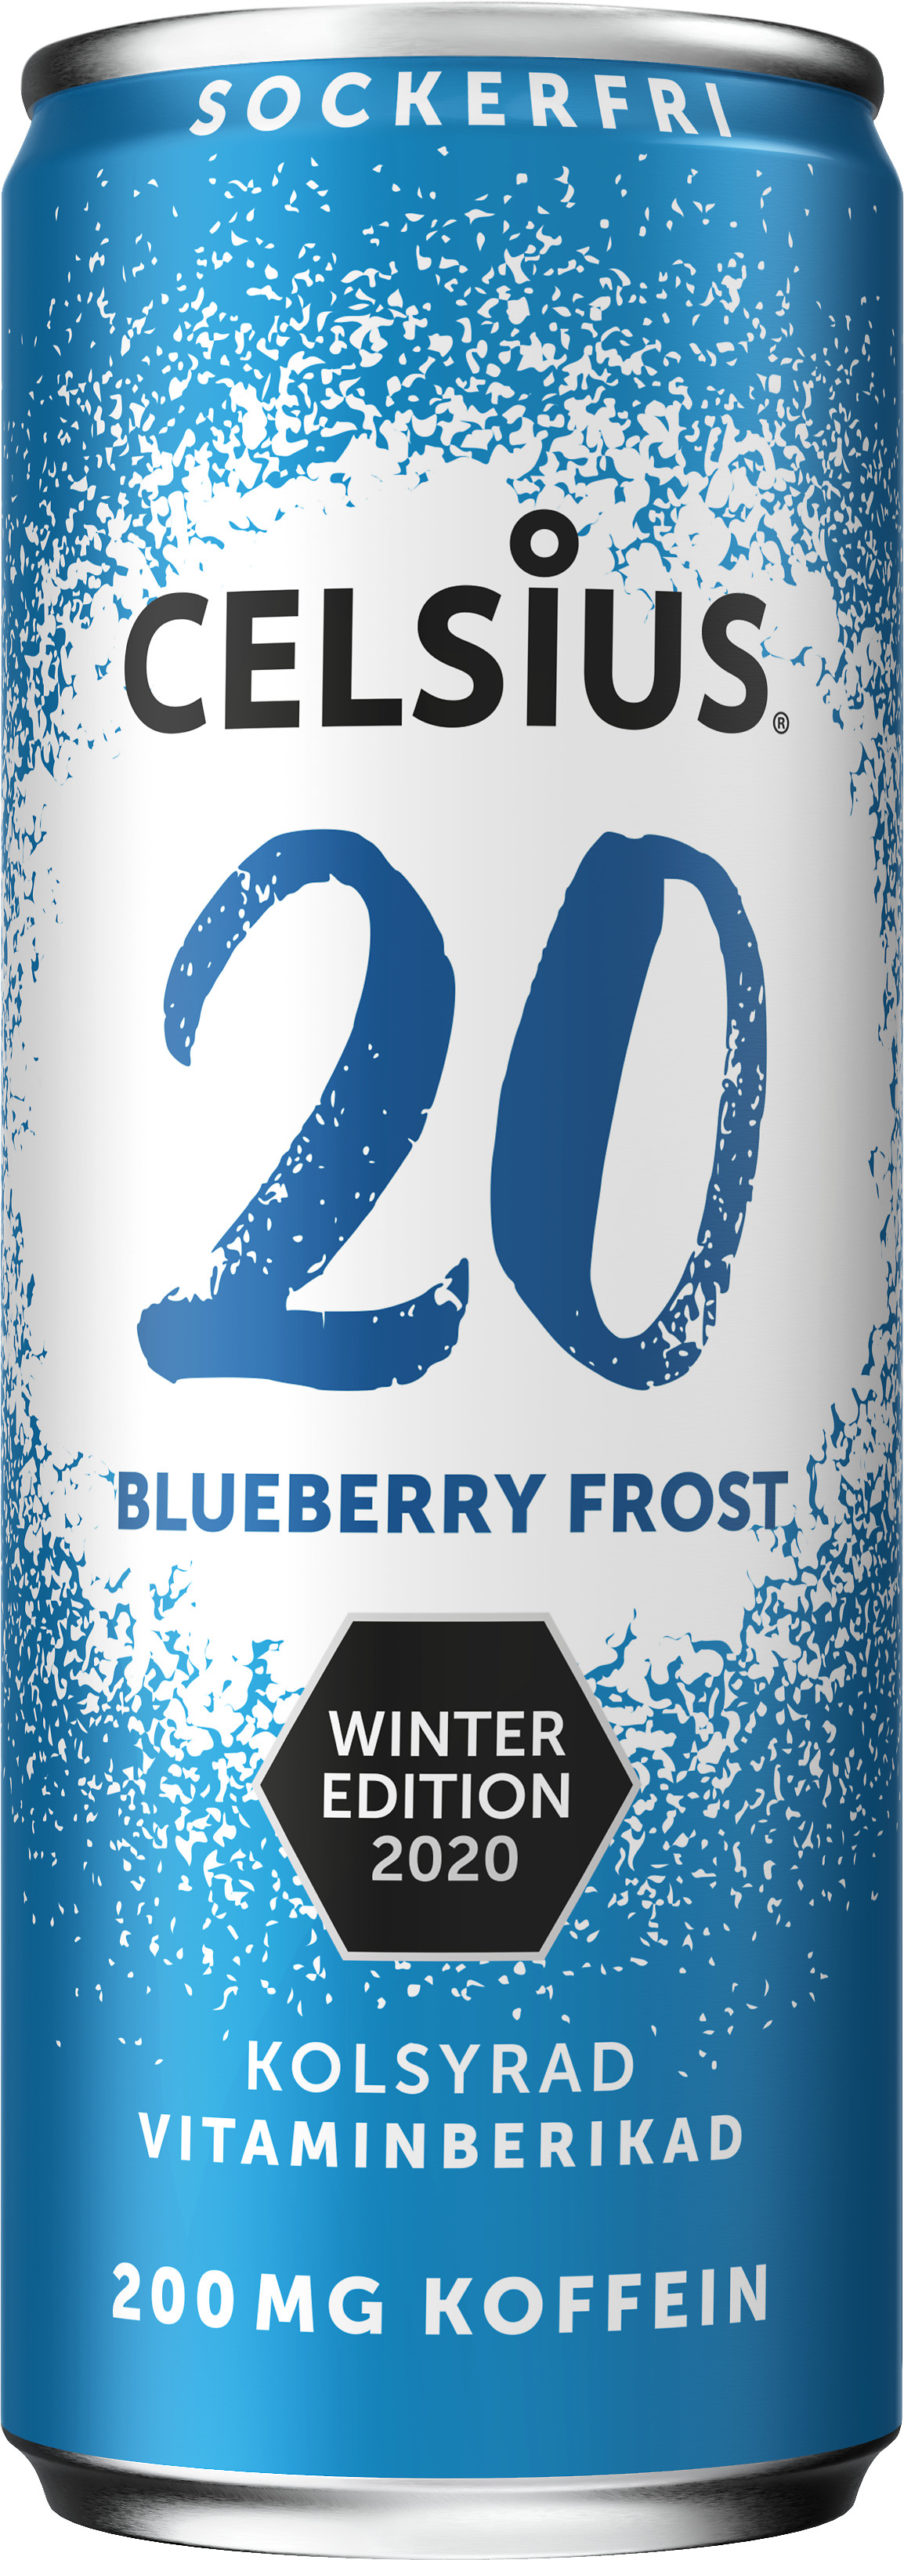 Blueberry Frost